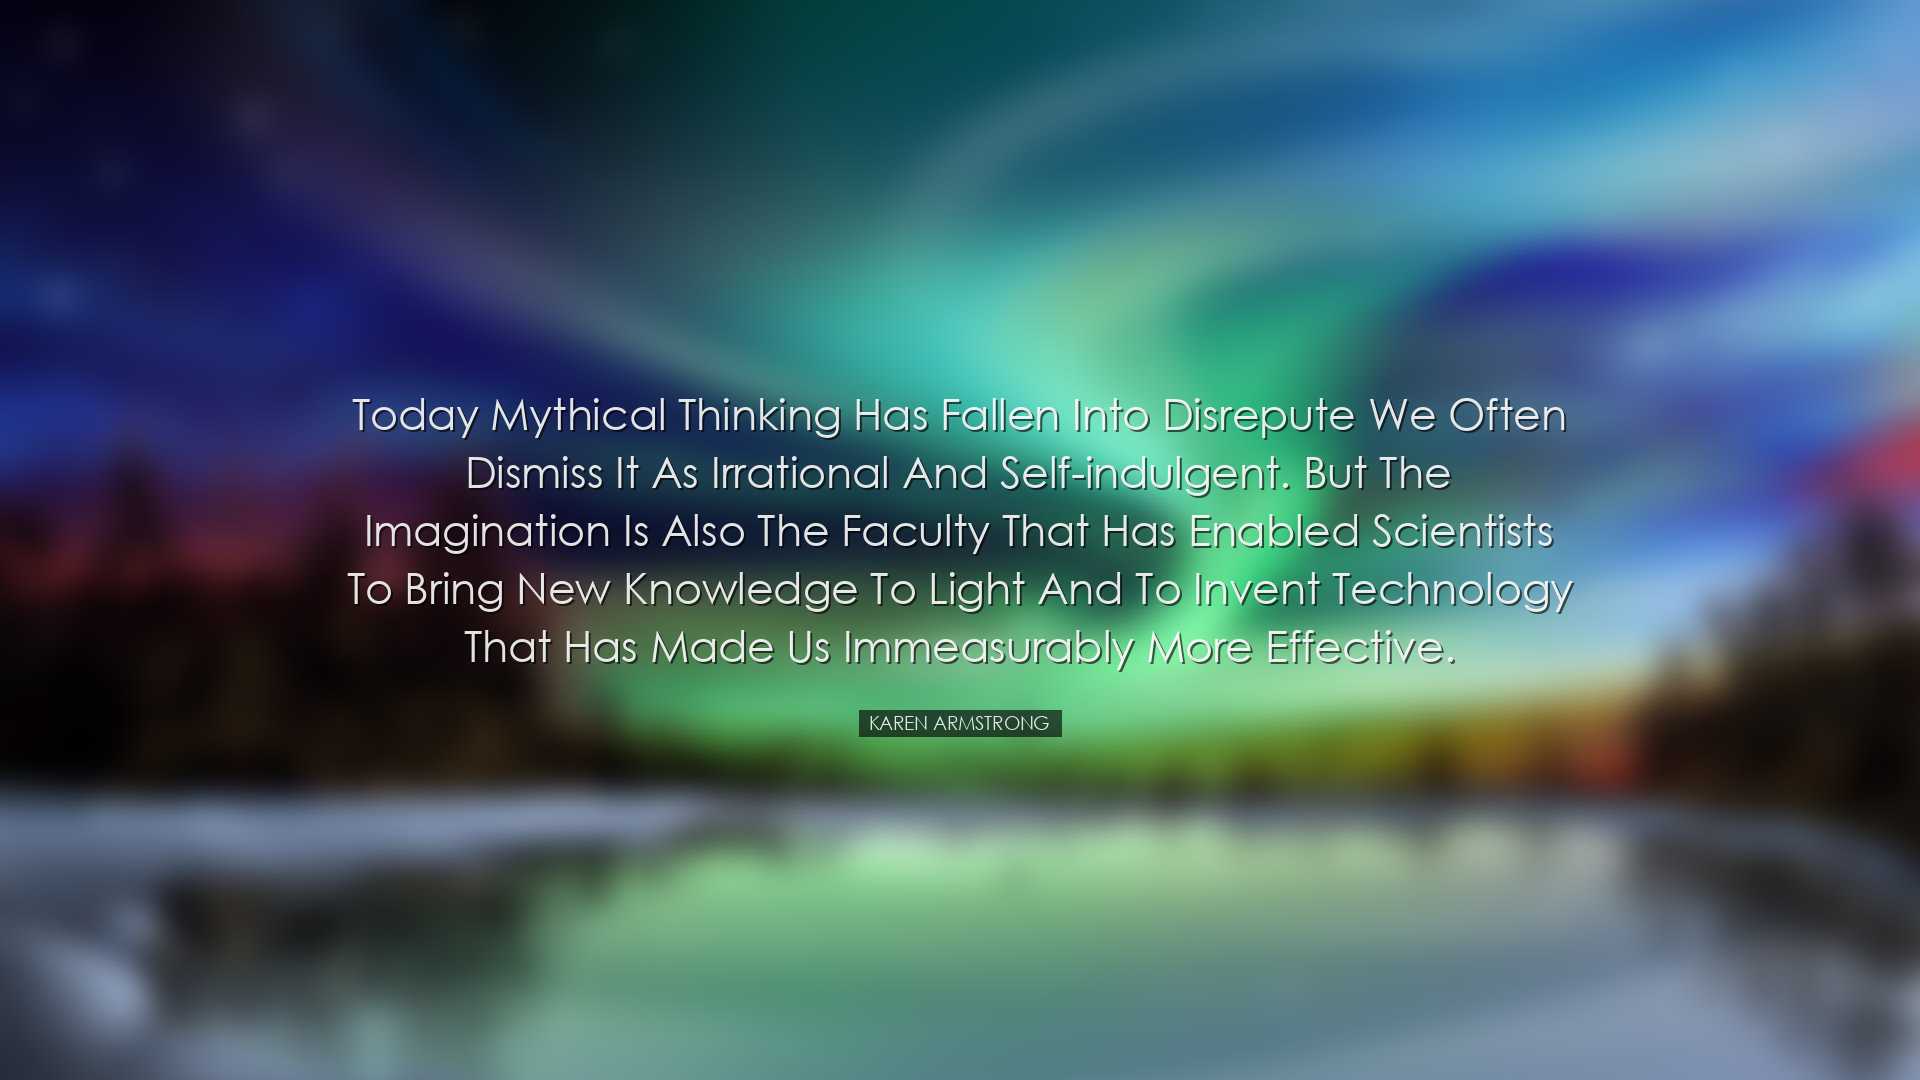 Today mythical thinking has fallen into disrepute we often dismiss